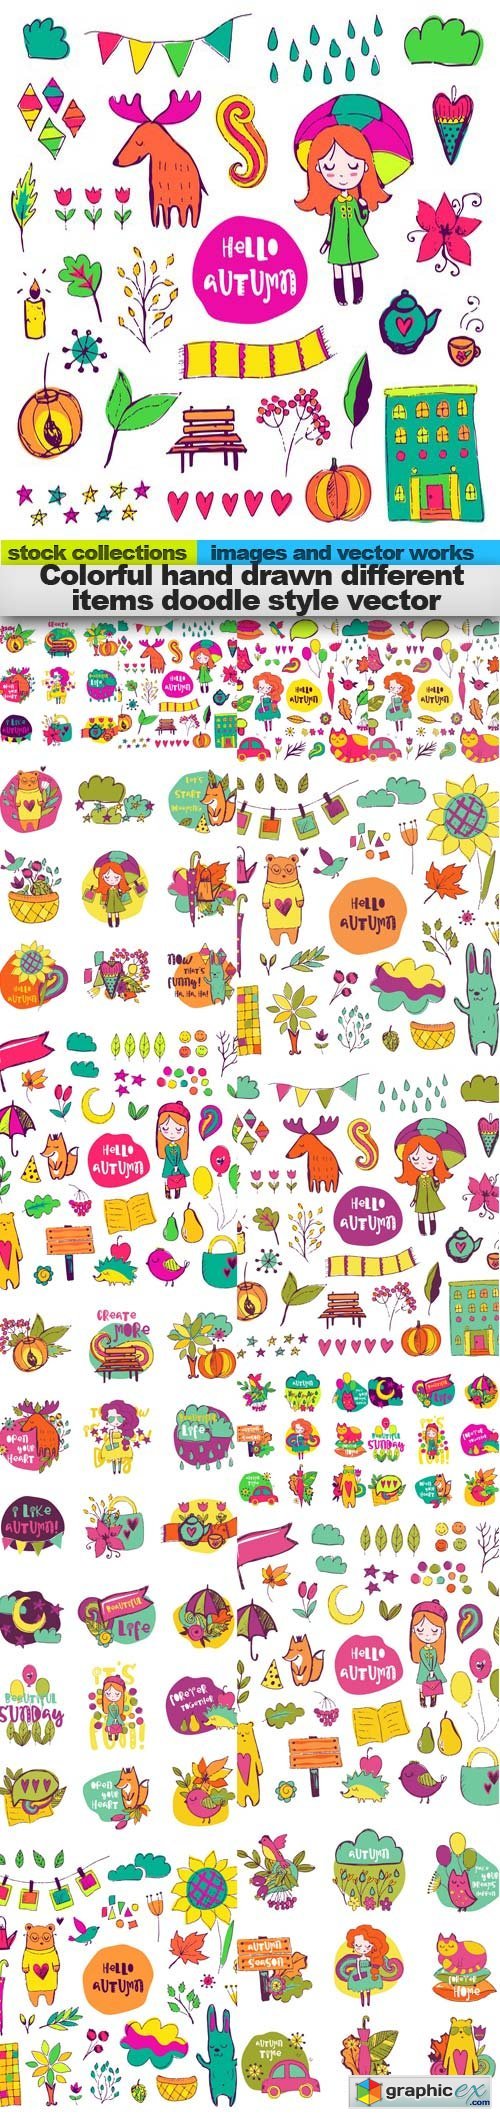 Colorful hand drawn different items doodle style vector, 15 x EPS